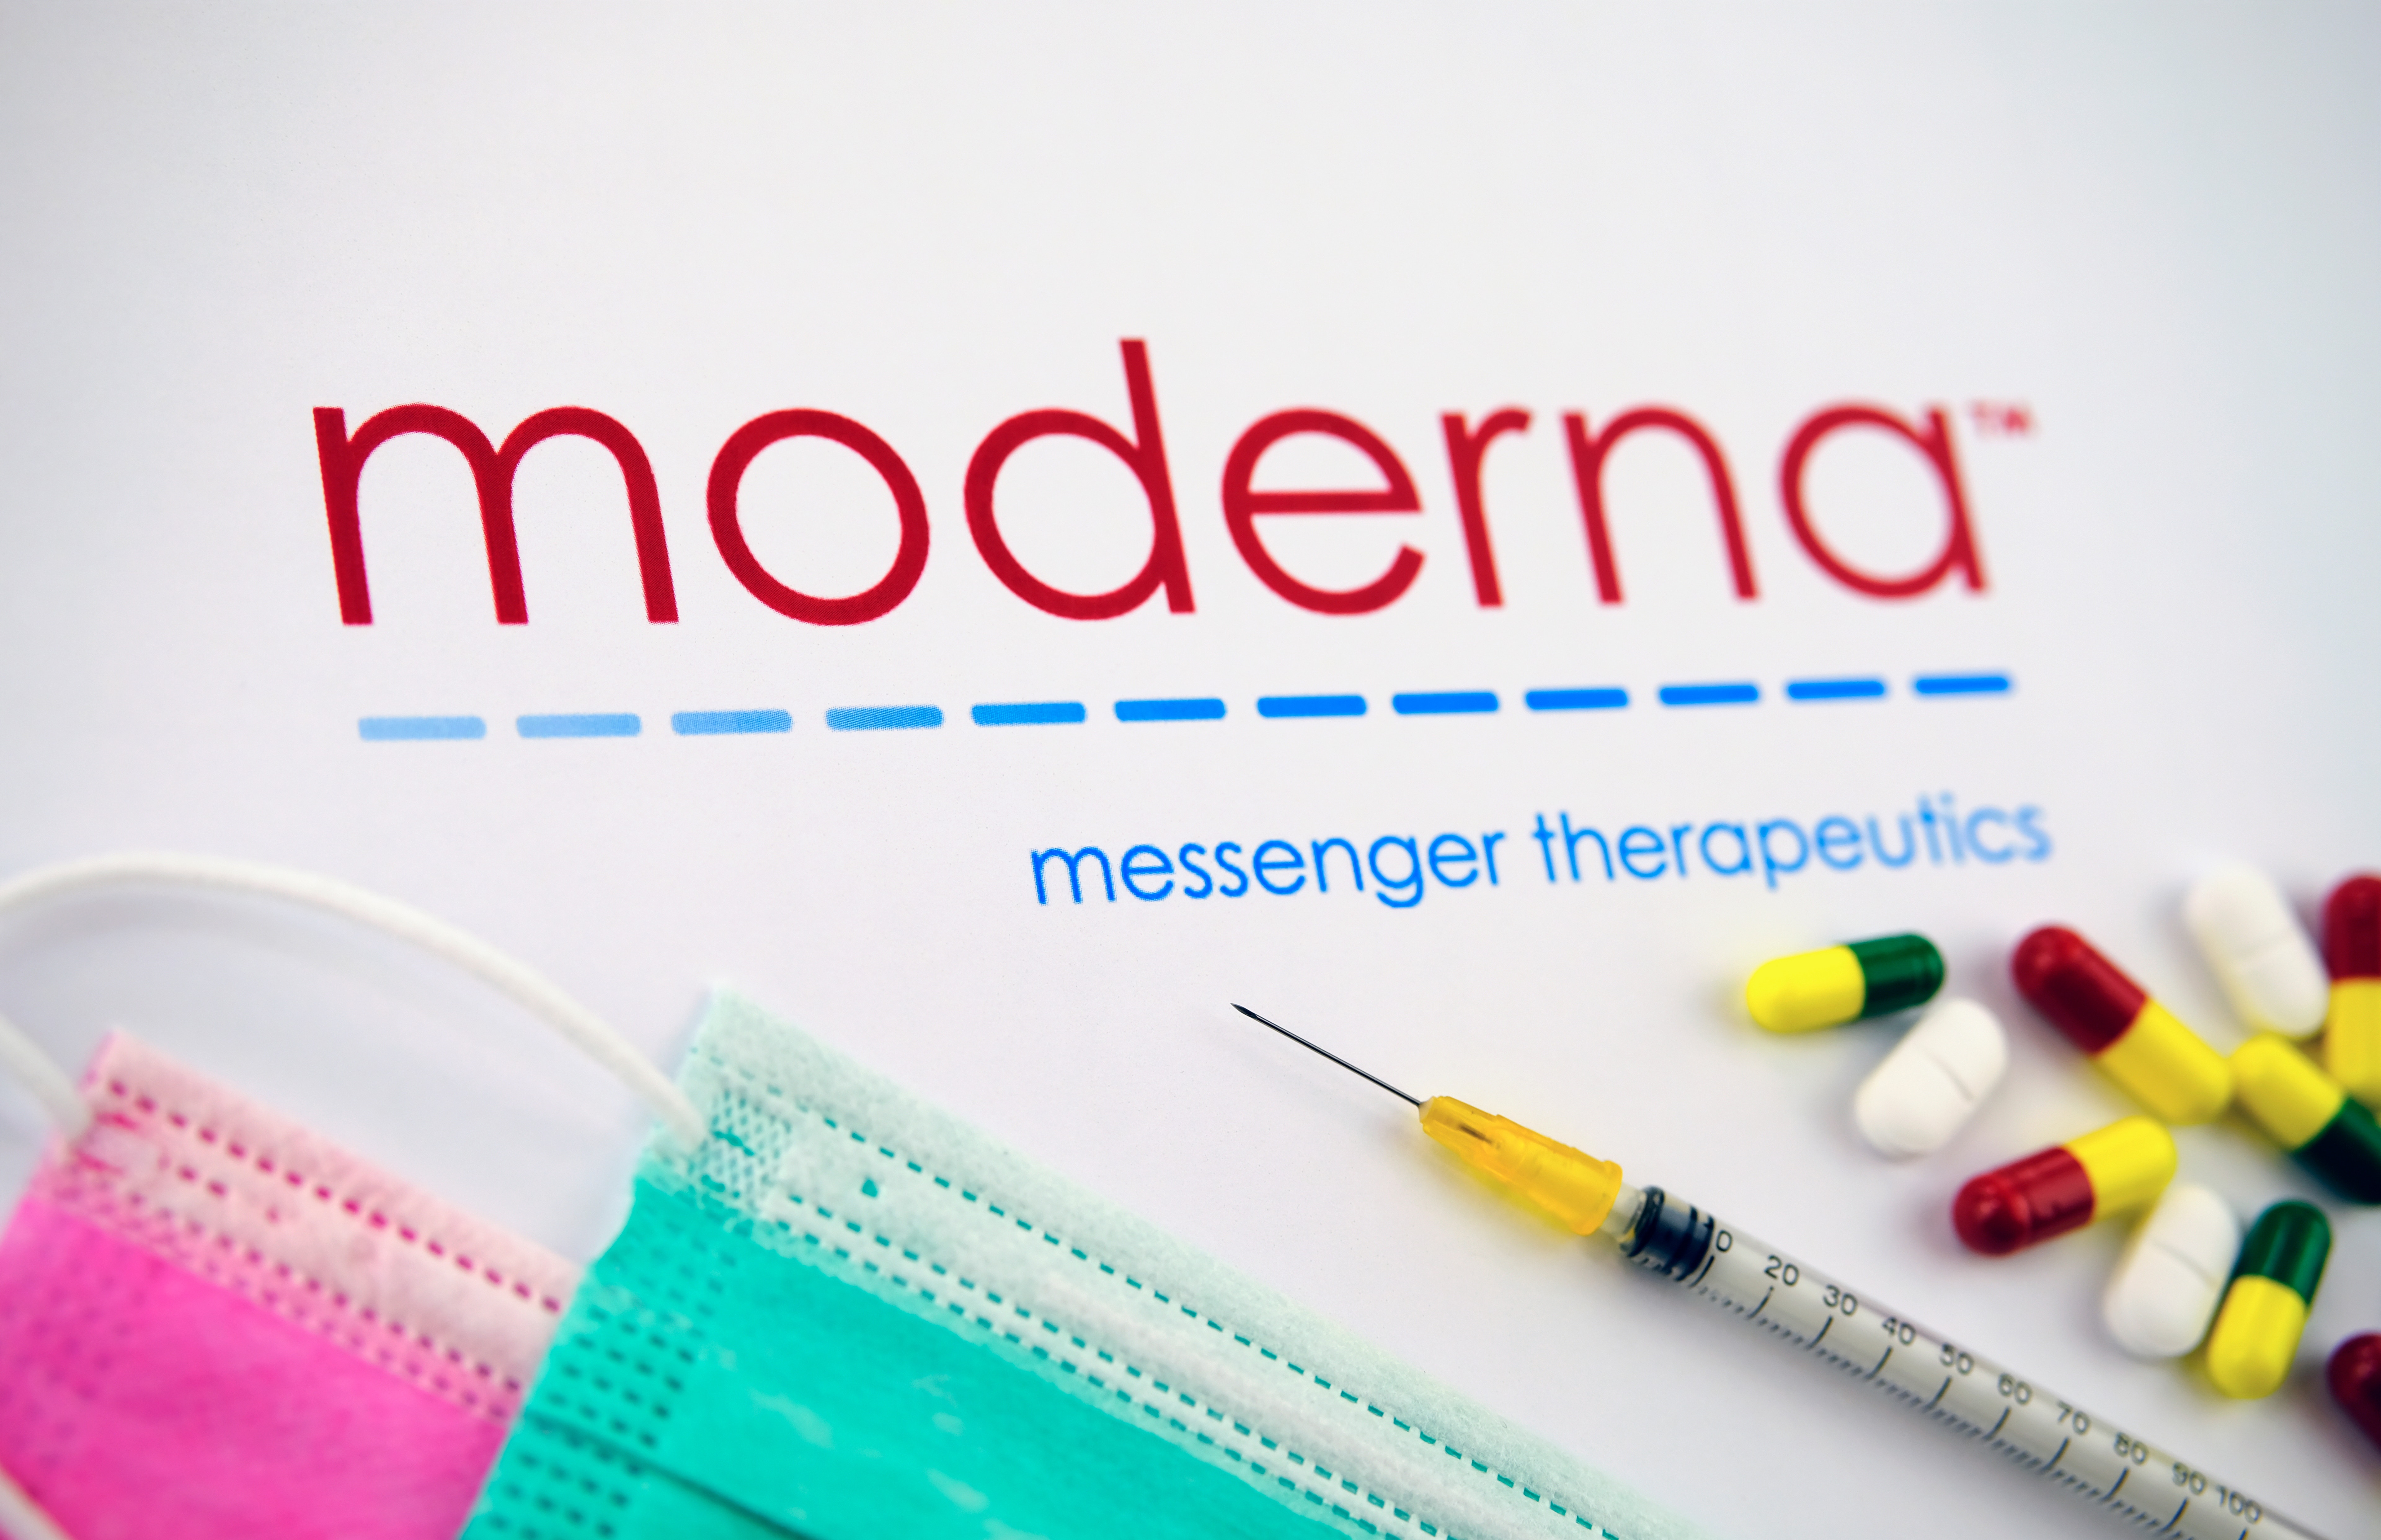 Moderna Has Multi-Billion-Dollar Opportunity Outside Of COVID-19 Vaccines, Analyst Says